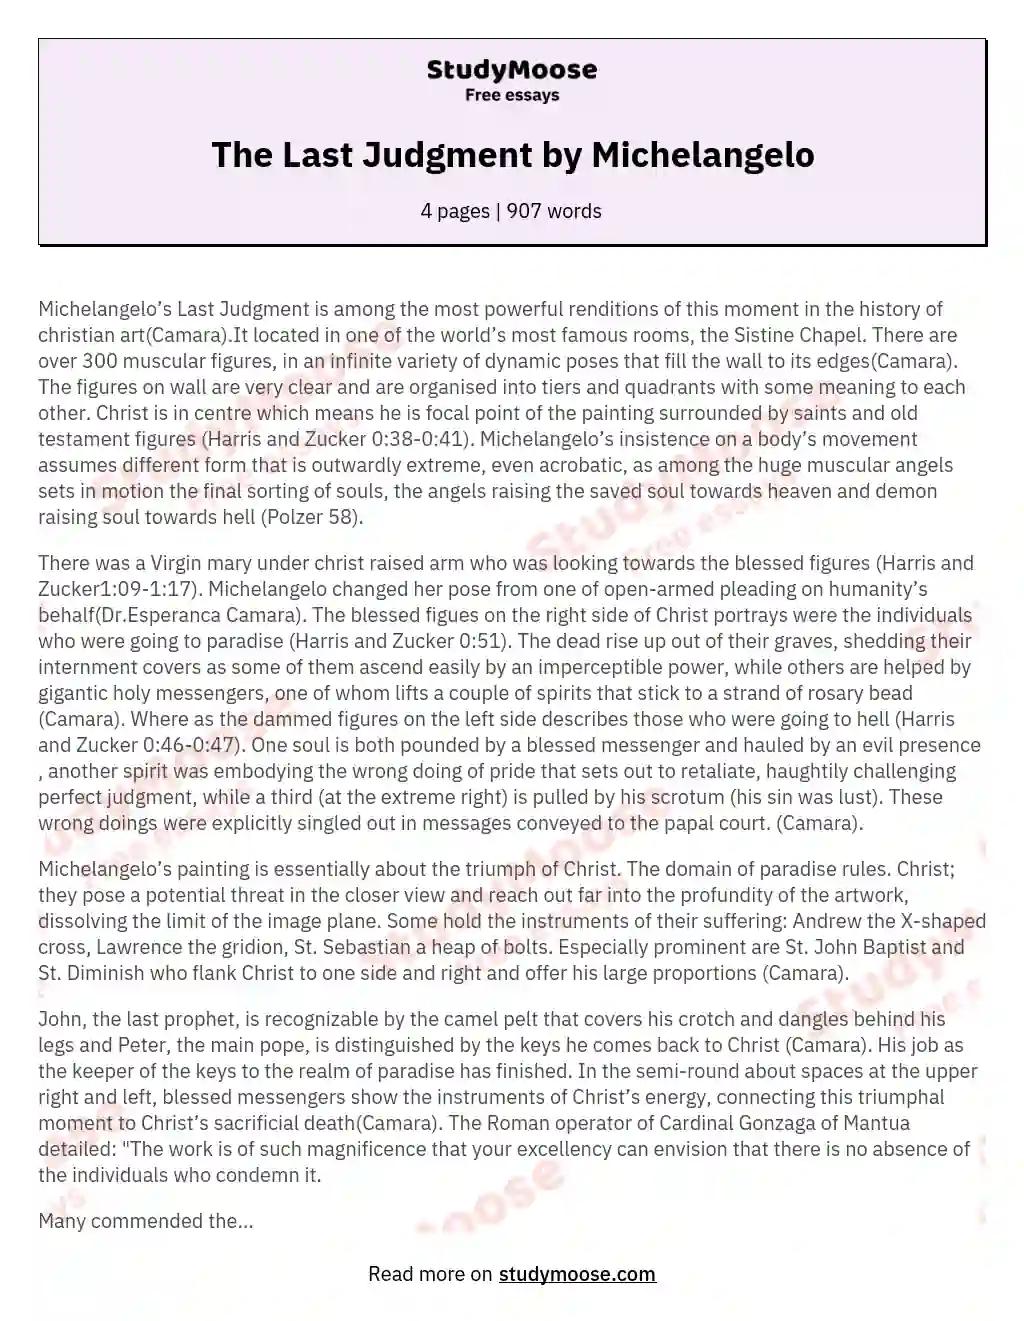 The Last Judgment by Michelangelo essay